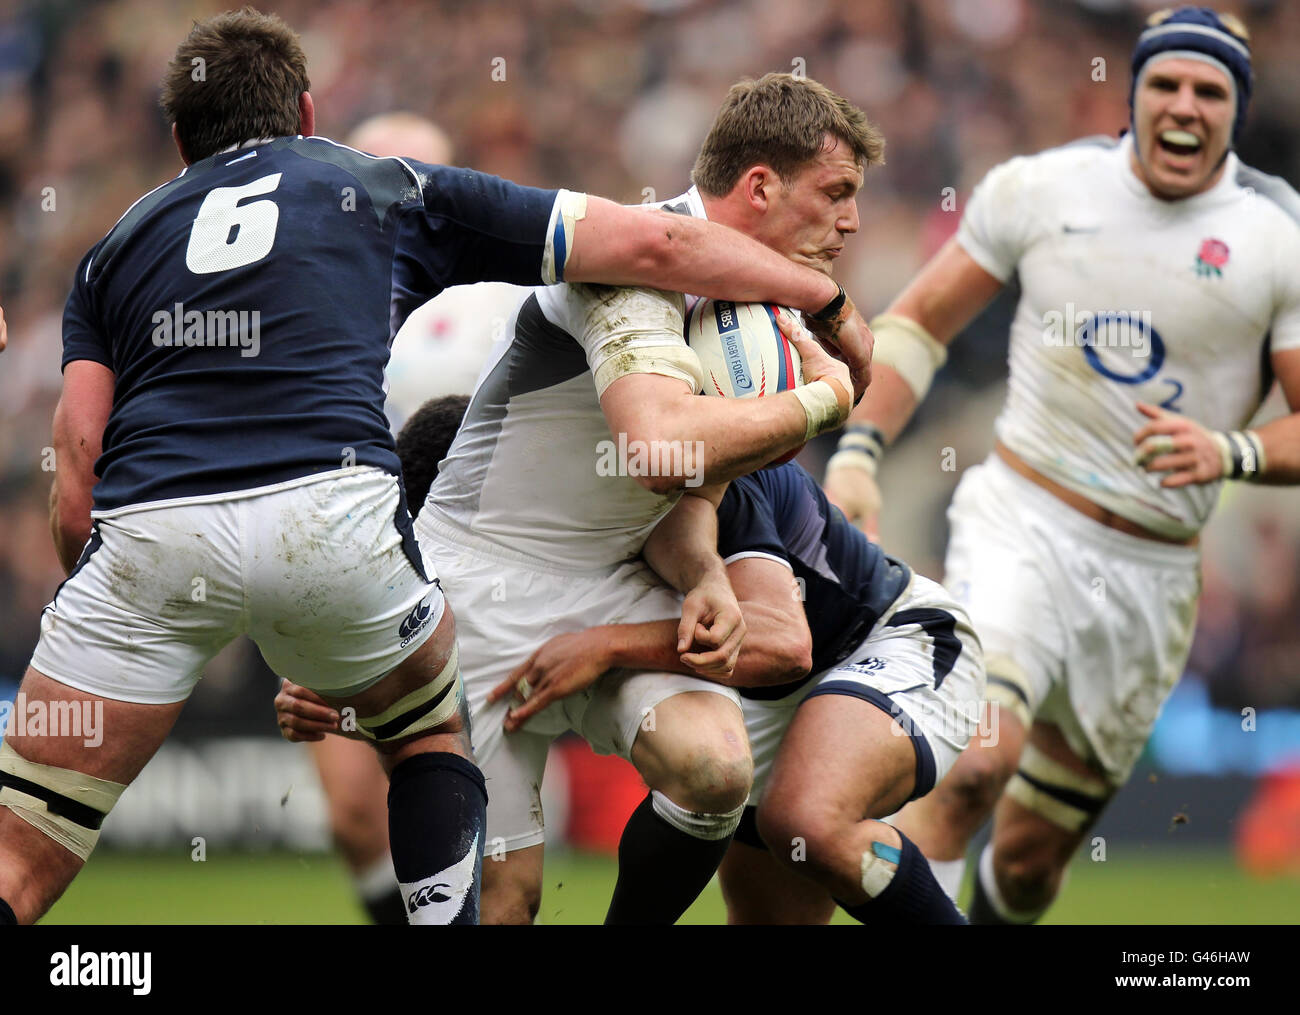 England's Mark Cueto finds no way through Scotland's defence during the RBS 6 Nations Match at Twickenham, London. Stock Photo